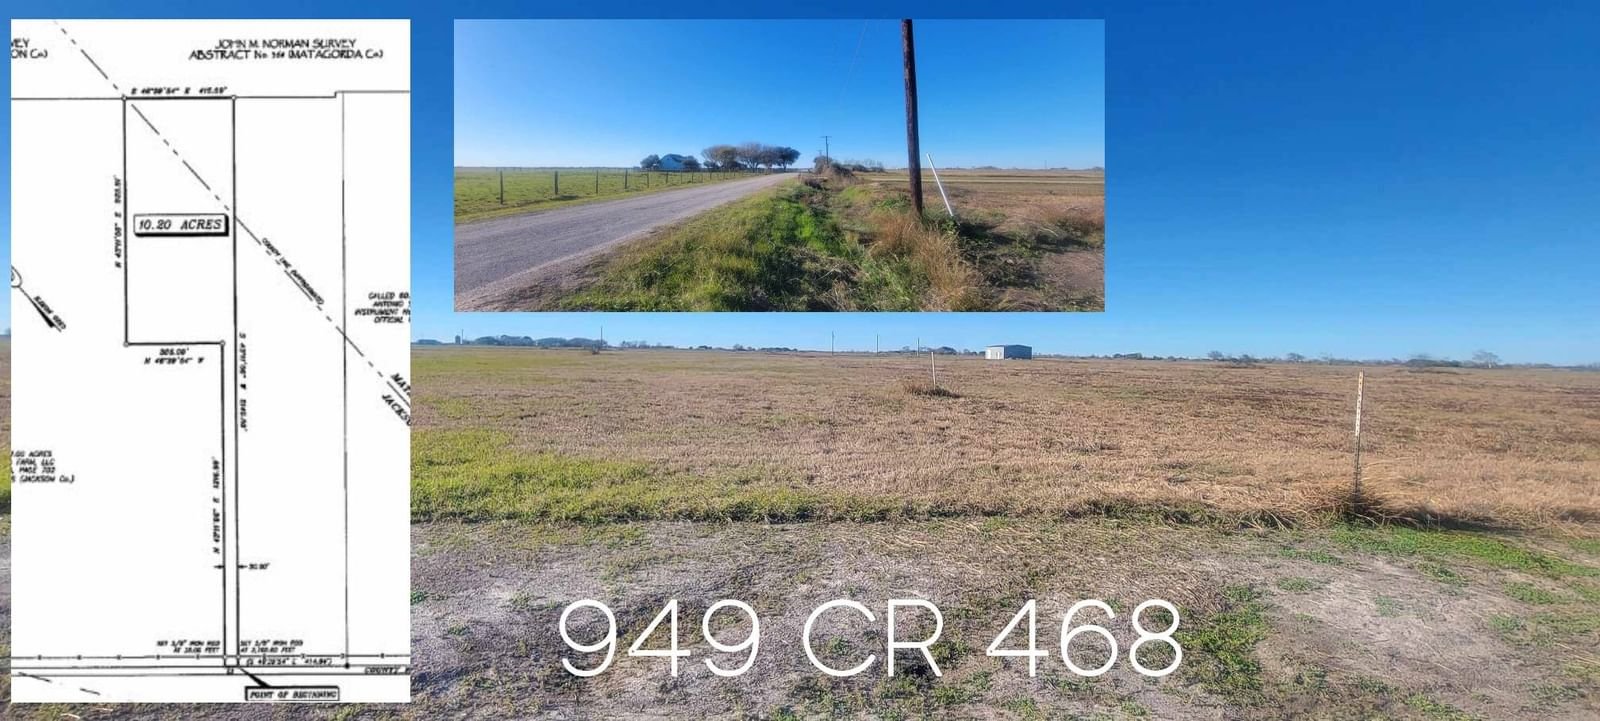 Real estate property located at 949 CR 468, Jackson, J M Norman Sur Abs #368, Palacios, TX, US